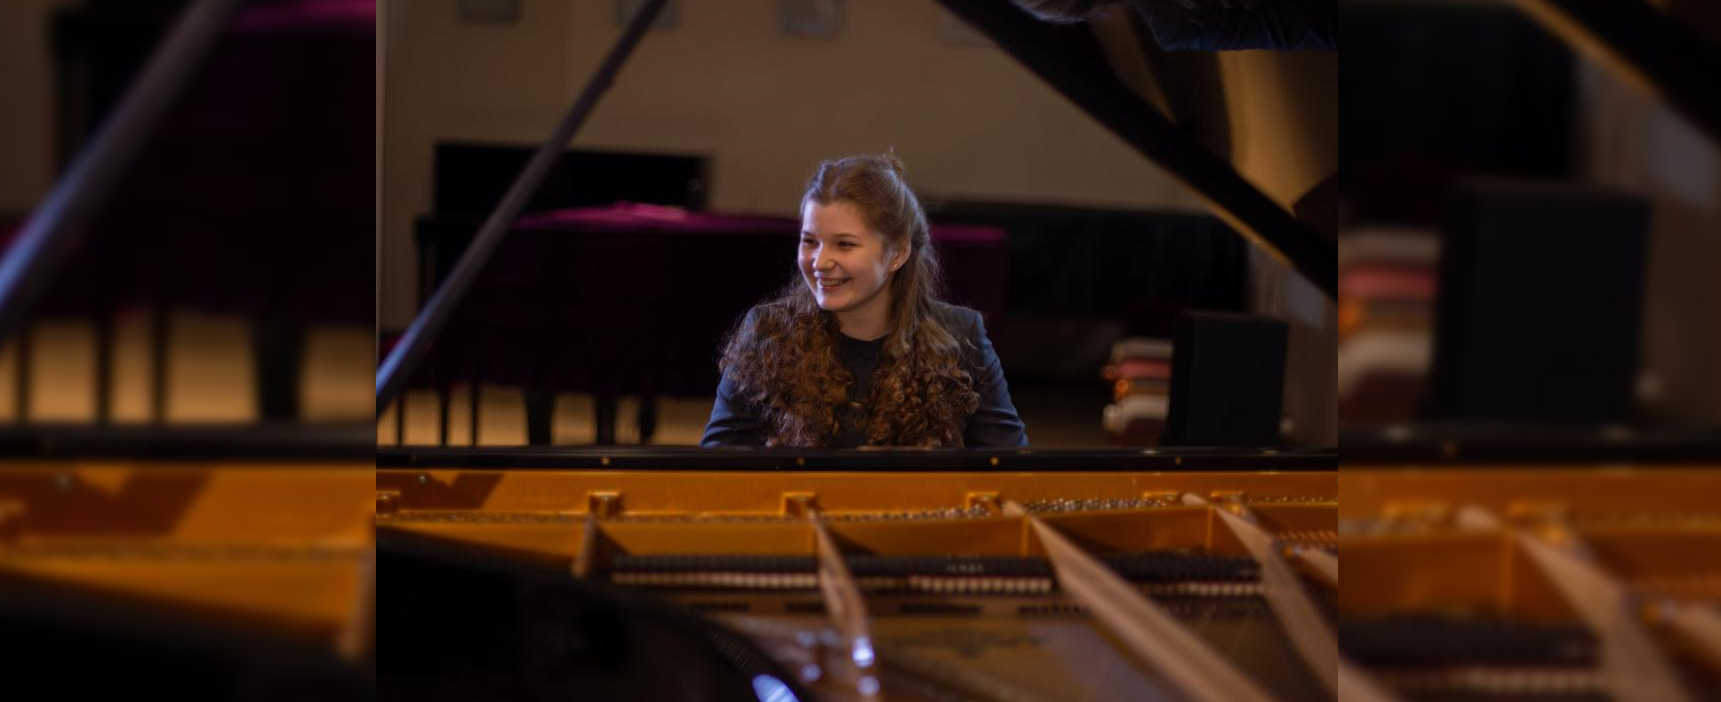 Khrystyna Mykhailichenko smiling whilst sitting at the piano